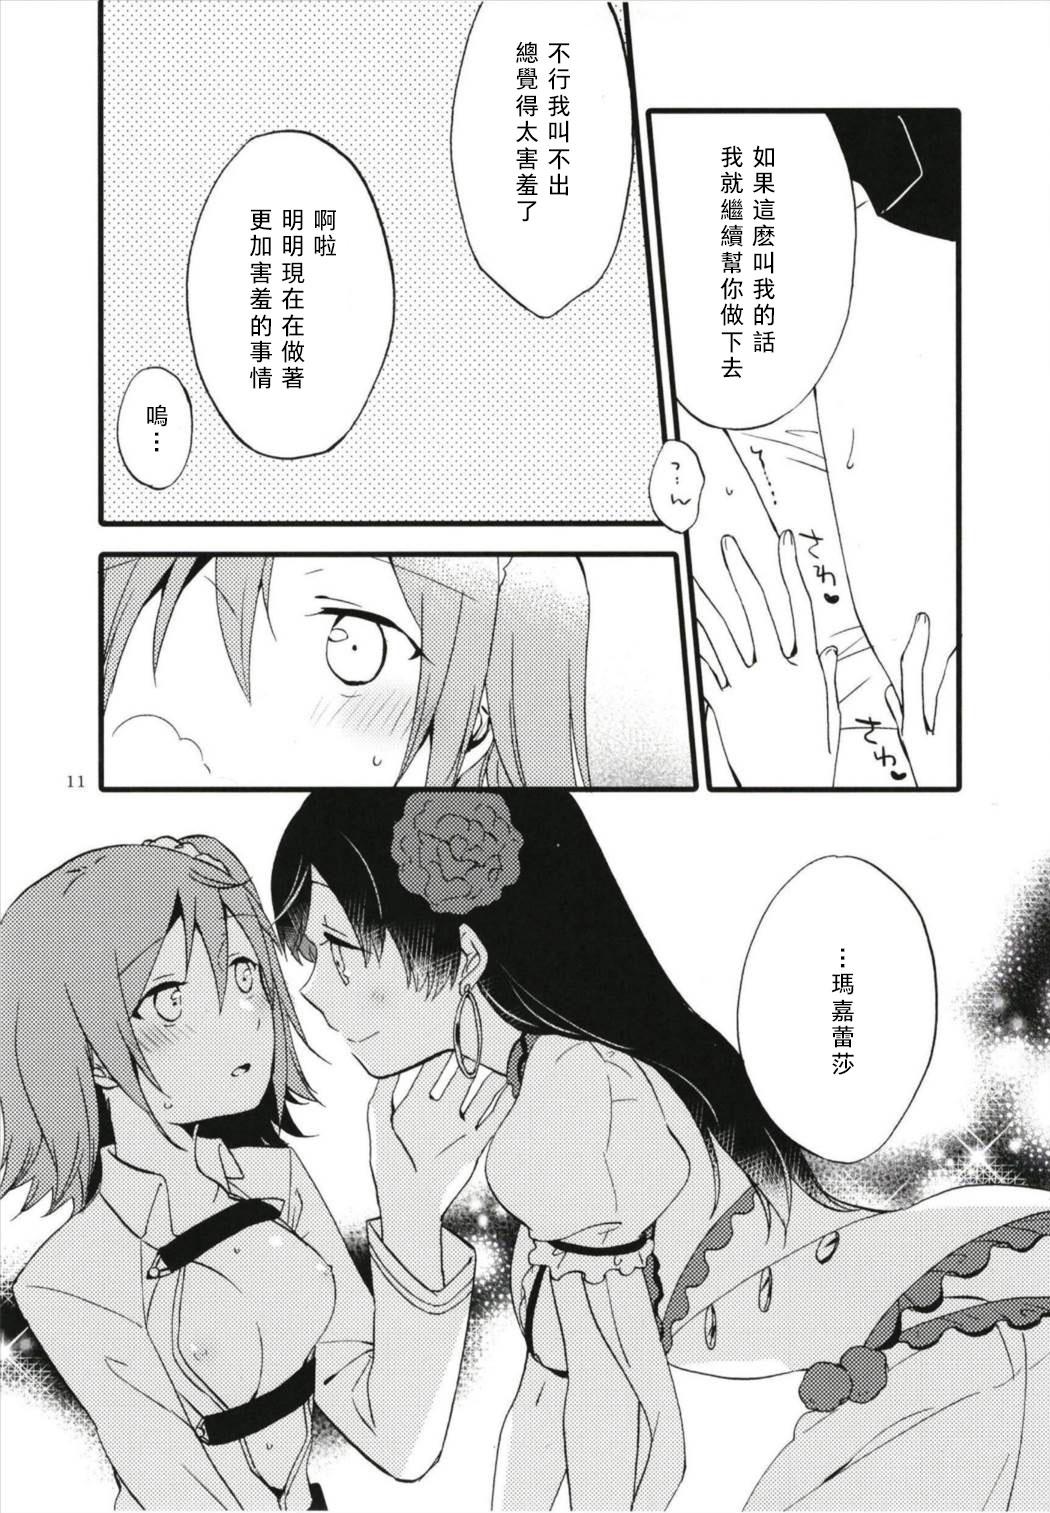 Naked MEMORIAL MG - Fate grand order Gay Hardcore - Page 11